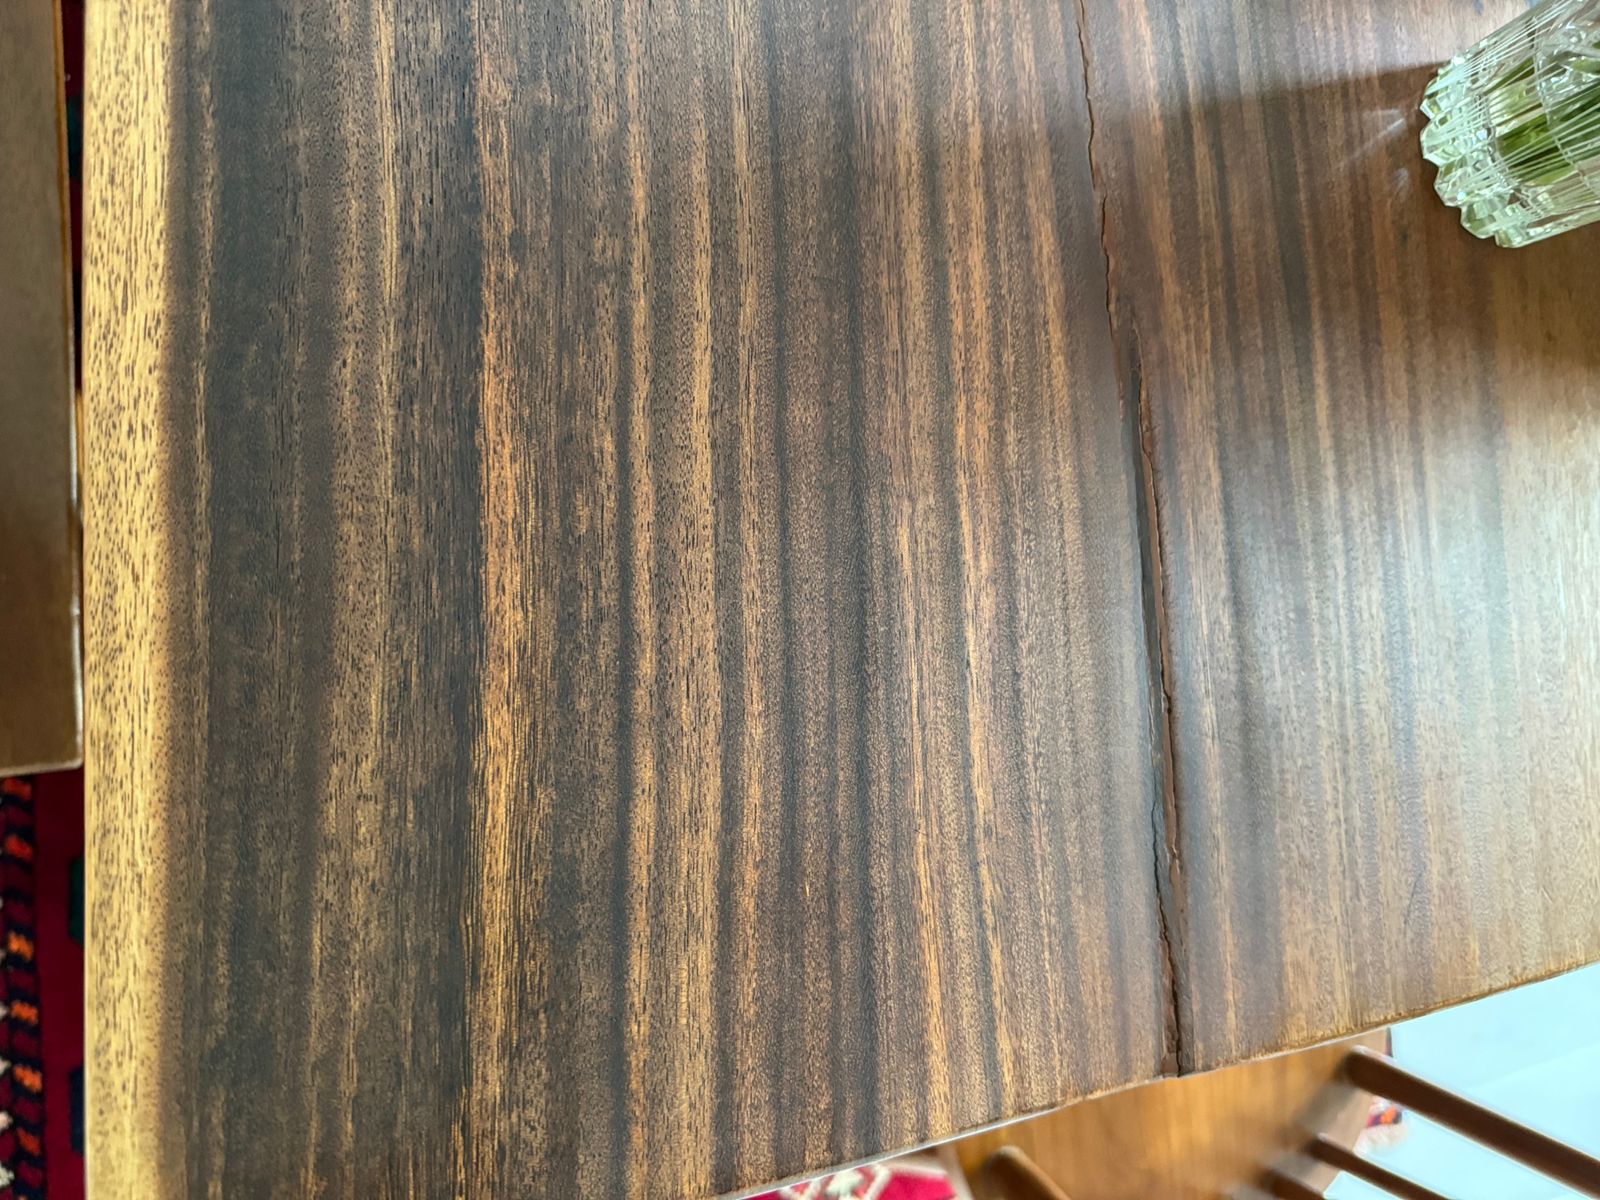 Wooden table repair and polishing